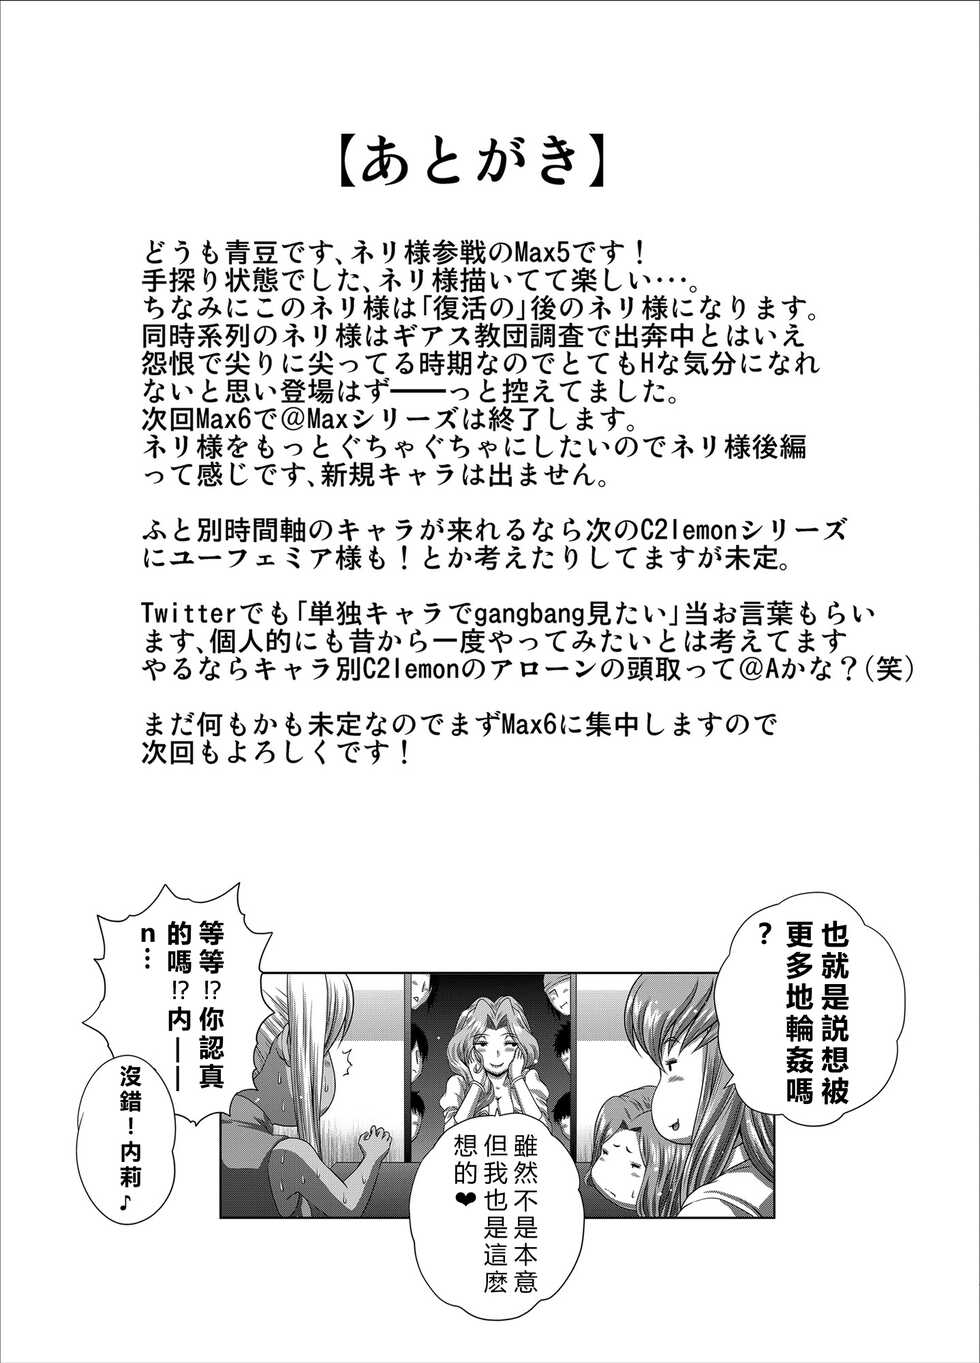 [Blue Bean (Kaname Aomame)] C2lemon@Max 5 (Code Geass: Lelouch of the Rebellion) [chinese][vexling機翻][Digital] - Page 32